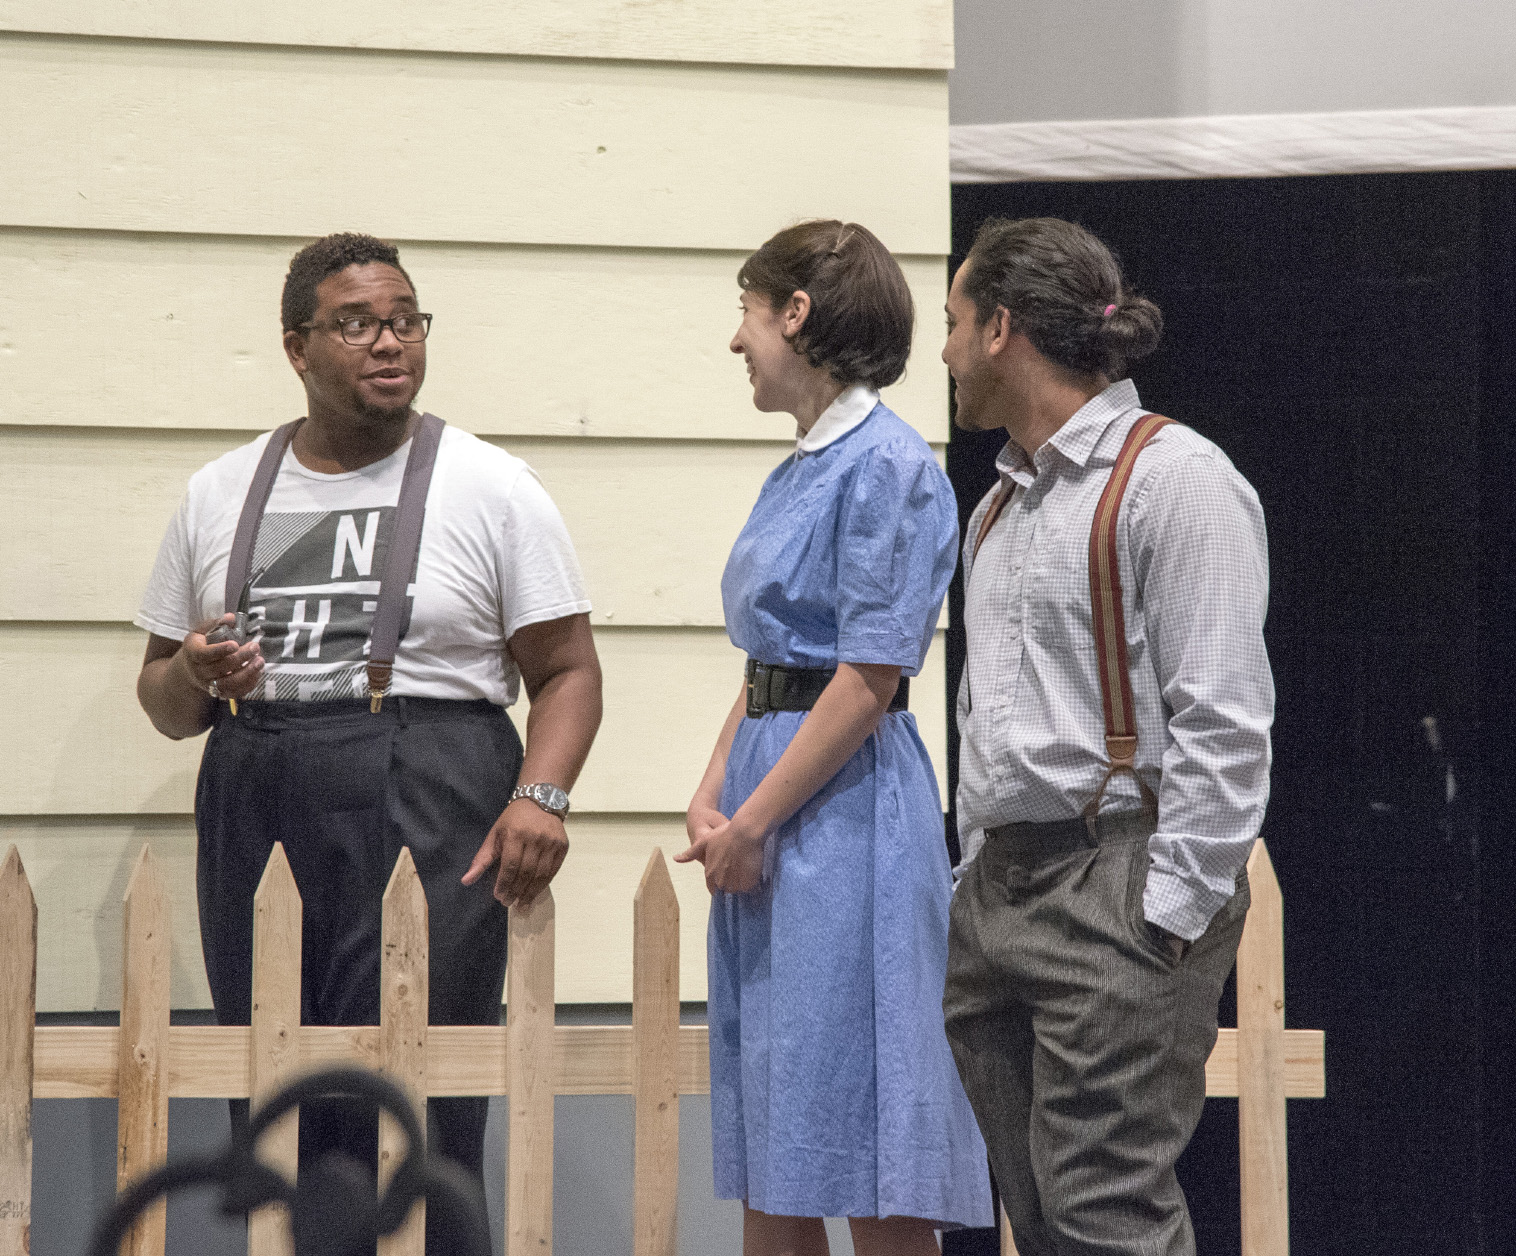 Rickie Jones, playing the role of Jim Bayliss, talks with castmates Sarah Adams, who plays Annie Deever, and Tomas Moquete, who plays Chris Keller, during a scene from the family-oriented play All My Sons.